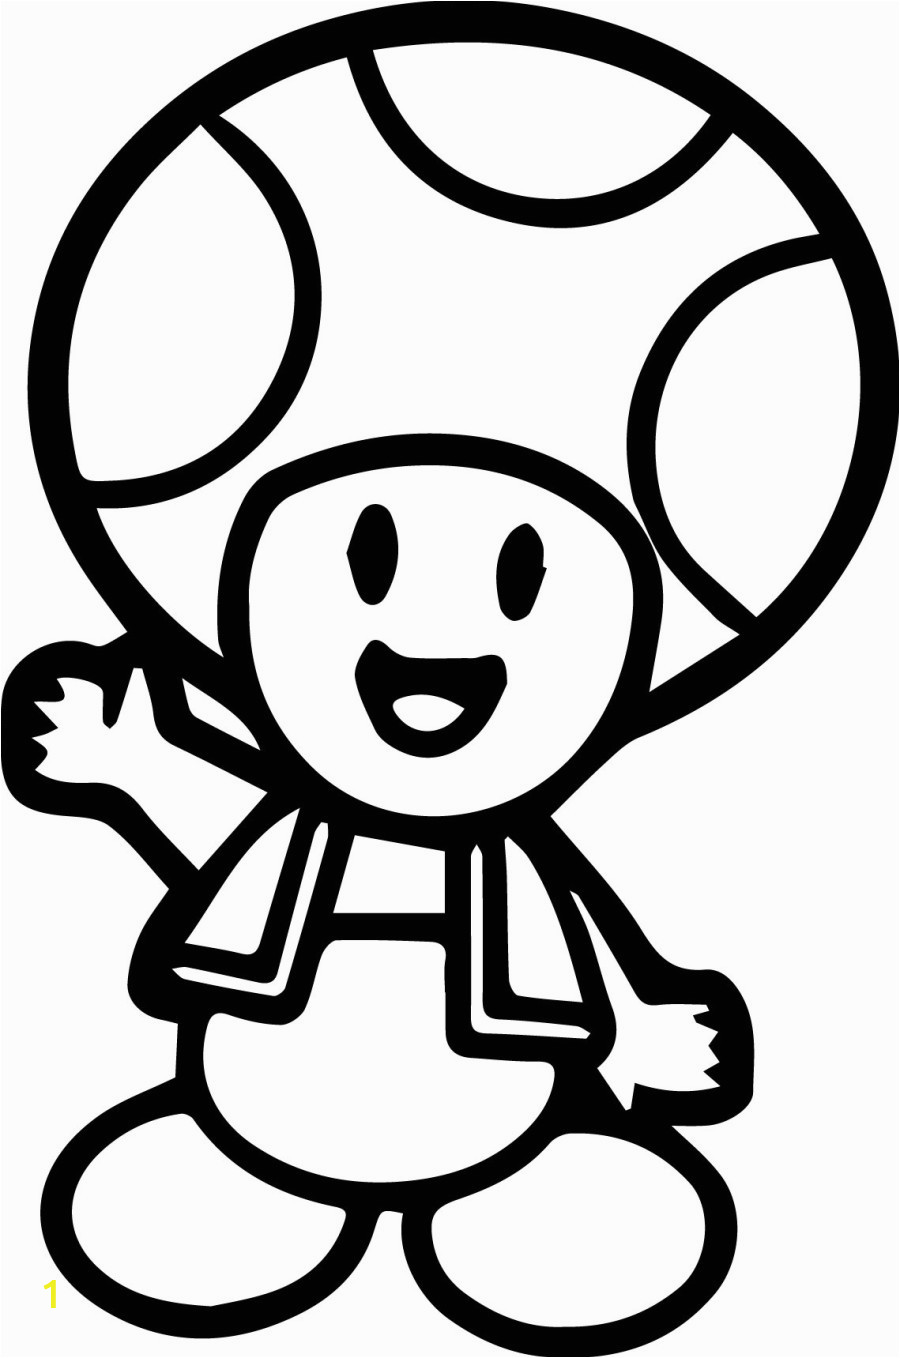 Super Mario Brothers toad Coloring Pages toad Mario Drawing at Getdrawings